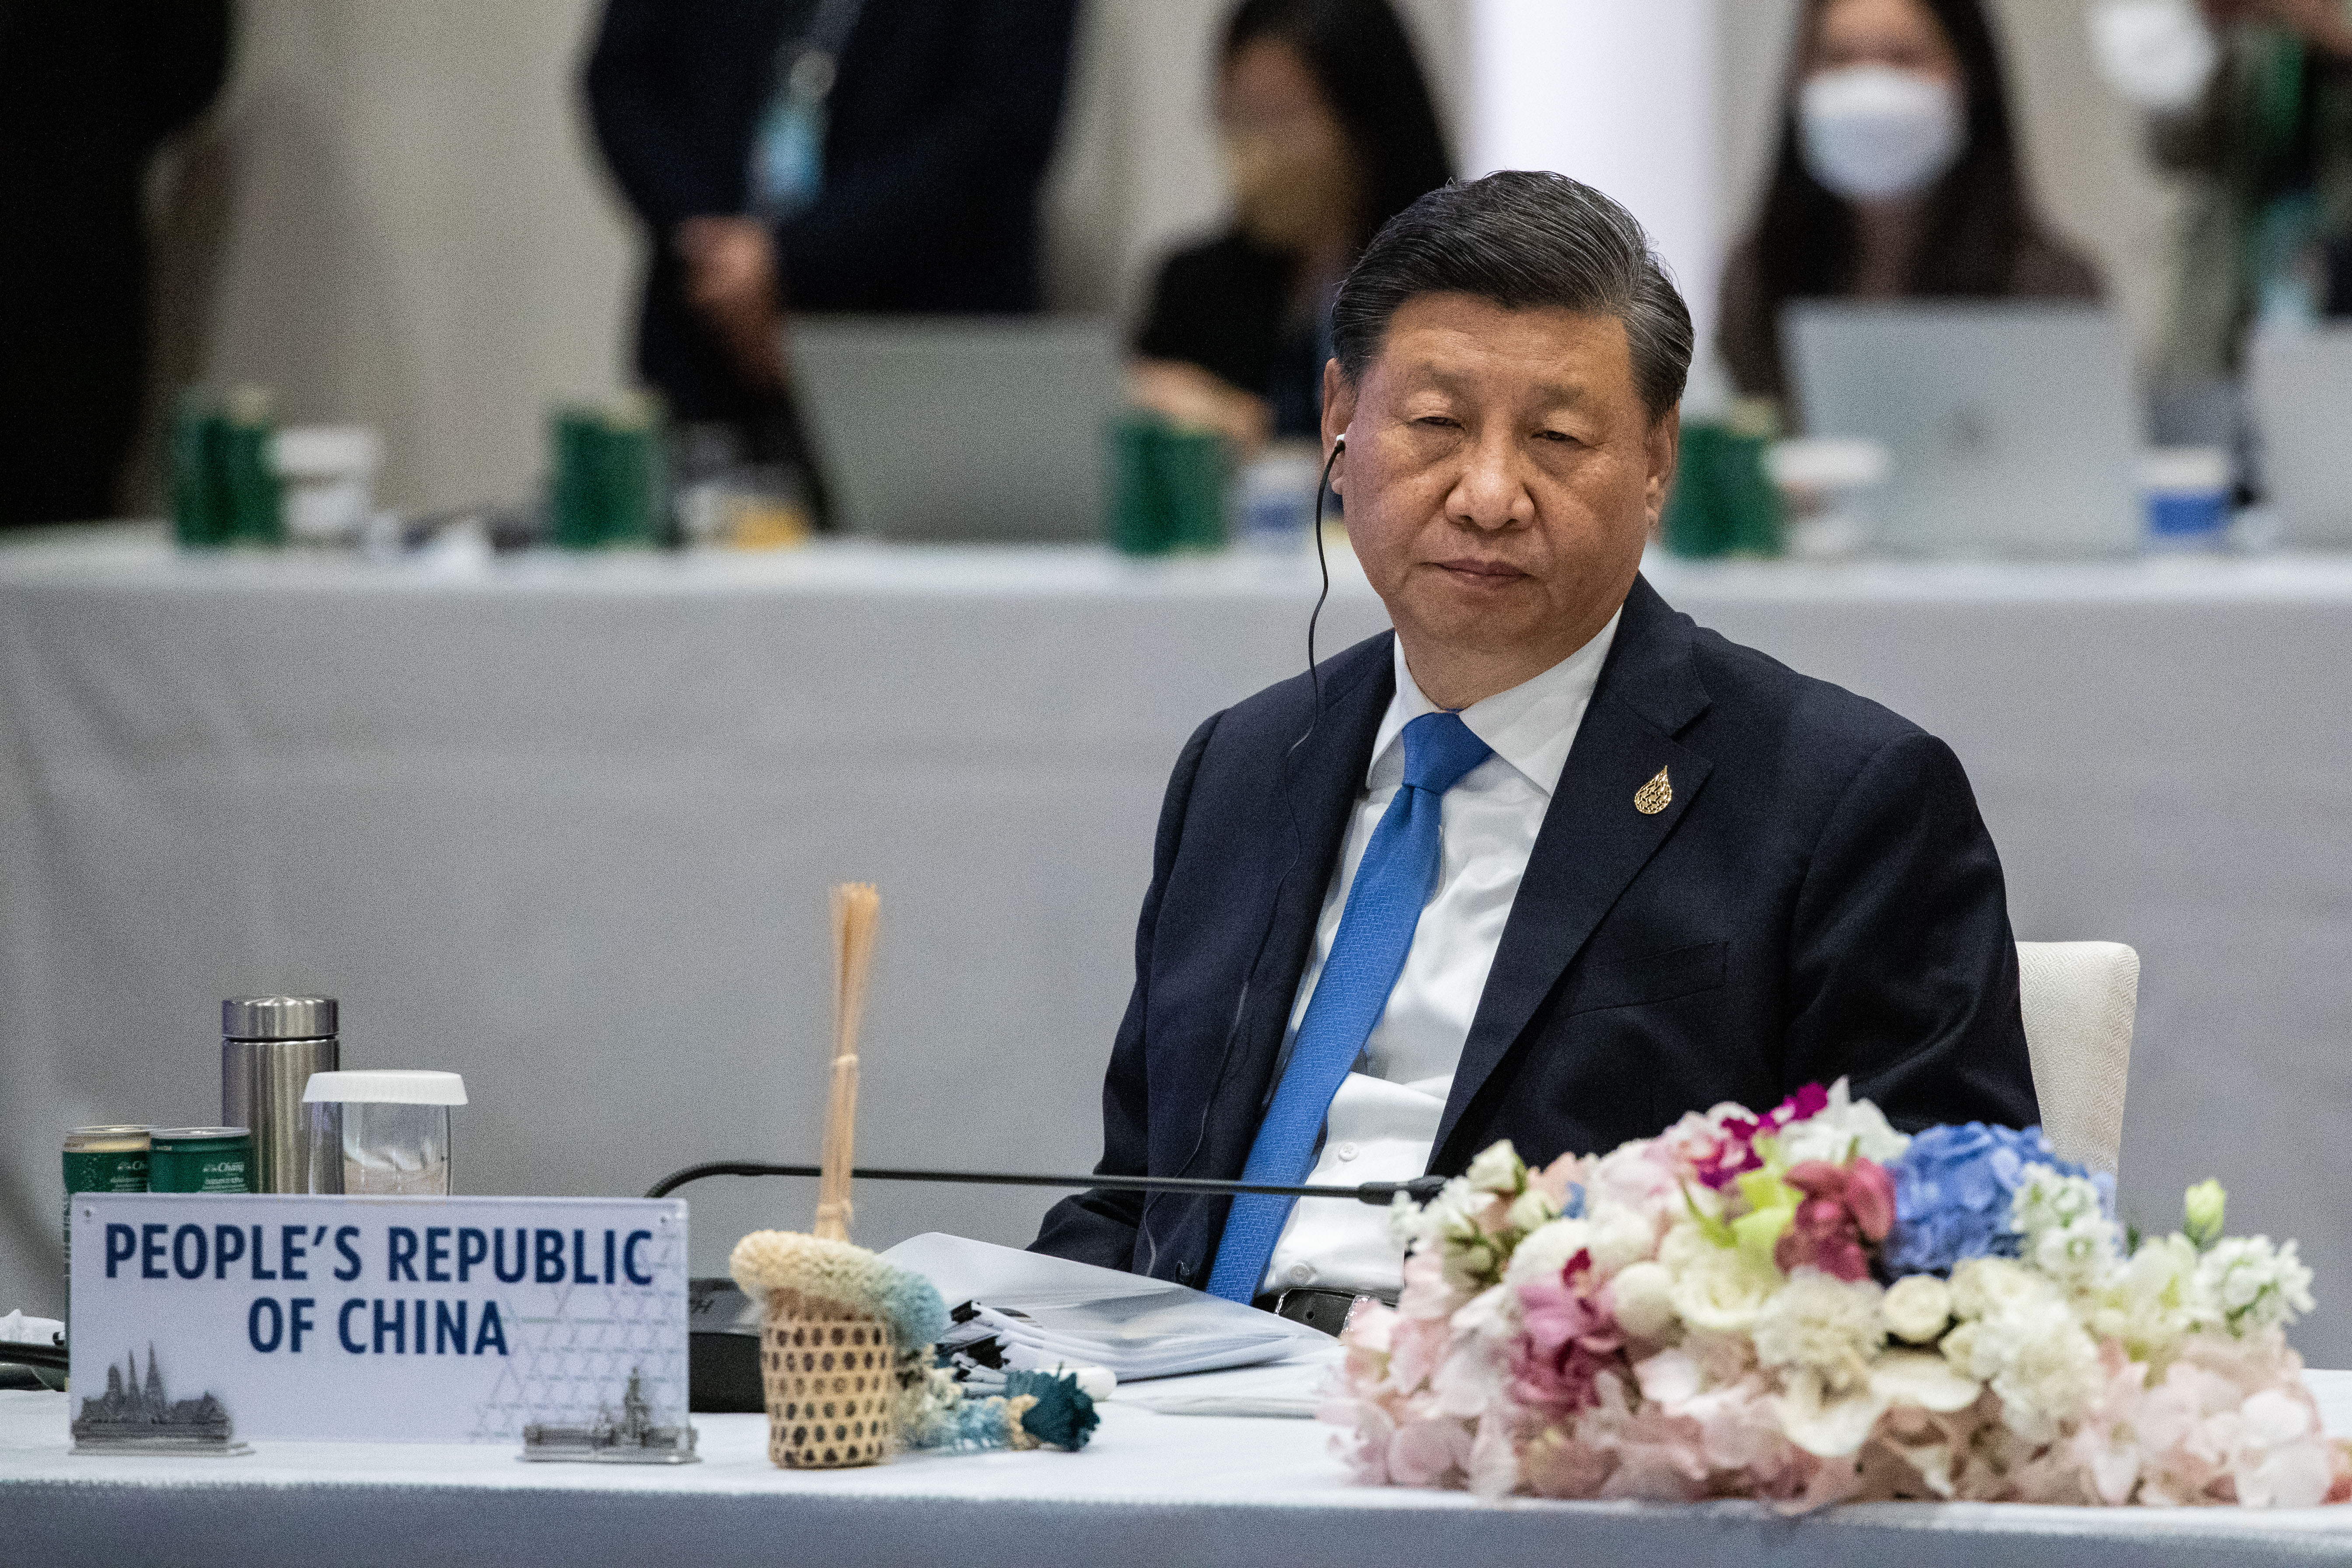 Xi Jinping sits at a table. A placard reads “People’s Republic of China” on the table in front of him. On his face is an expression of boredom, or perhaps weary tiredness. 